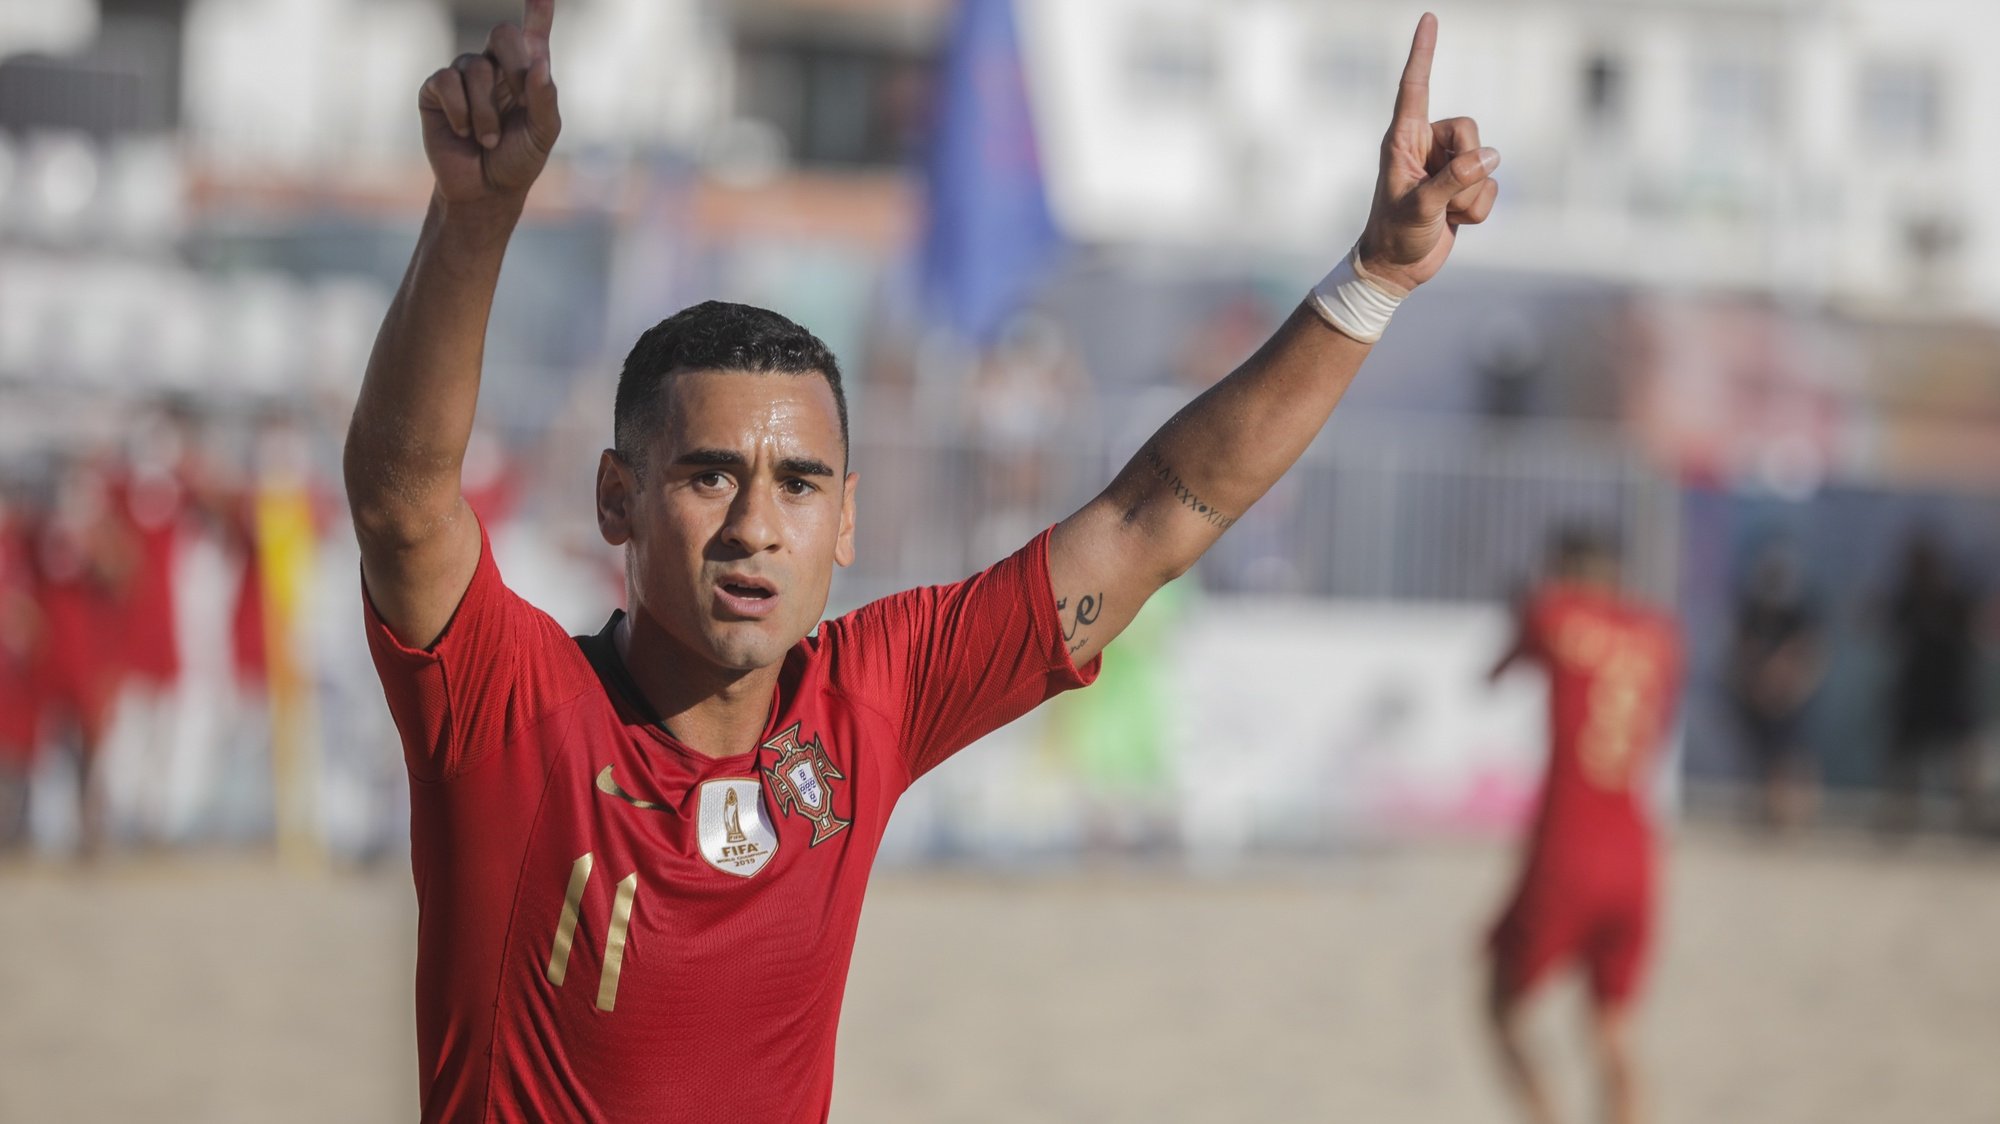 epa08651301 The player of the Portugal national team Leo Martins celebrates the scoring of a goal against the Swiss national team during the Superfinal of the European Beach Soccer League held at Nazare, Portugal, 6th September 2020.  EPA/PAULO CUNHA